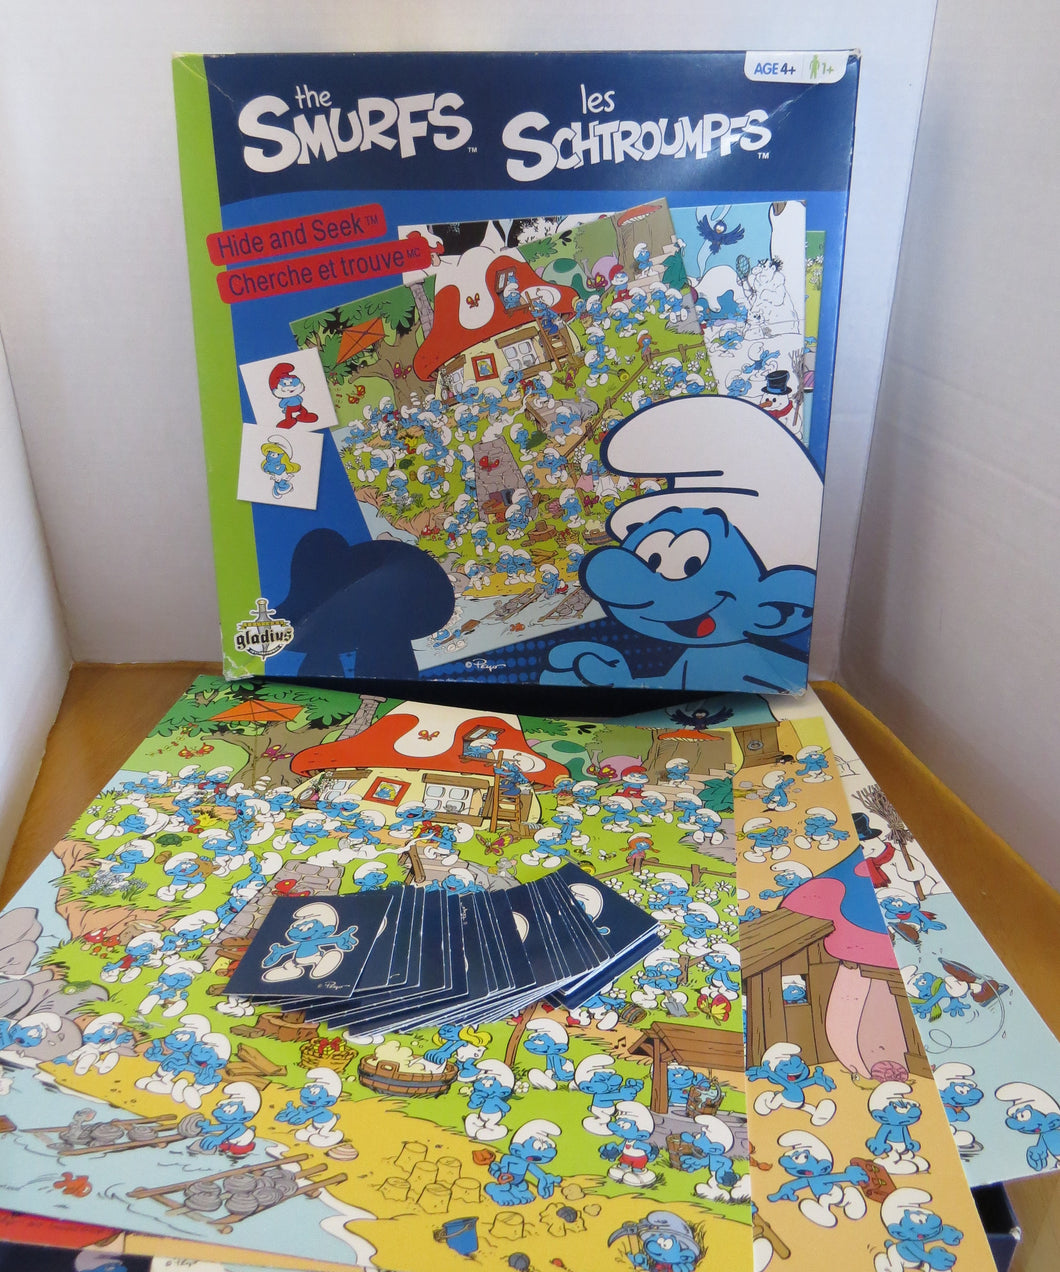 SMURFS - SCHTROUMPFS - Boardgame complete by Gladius